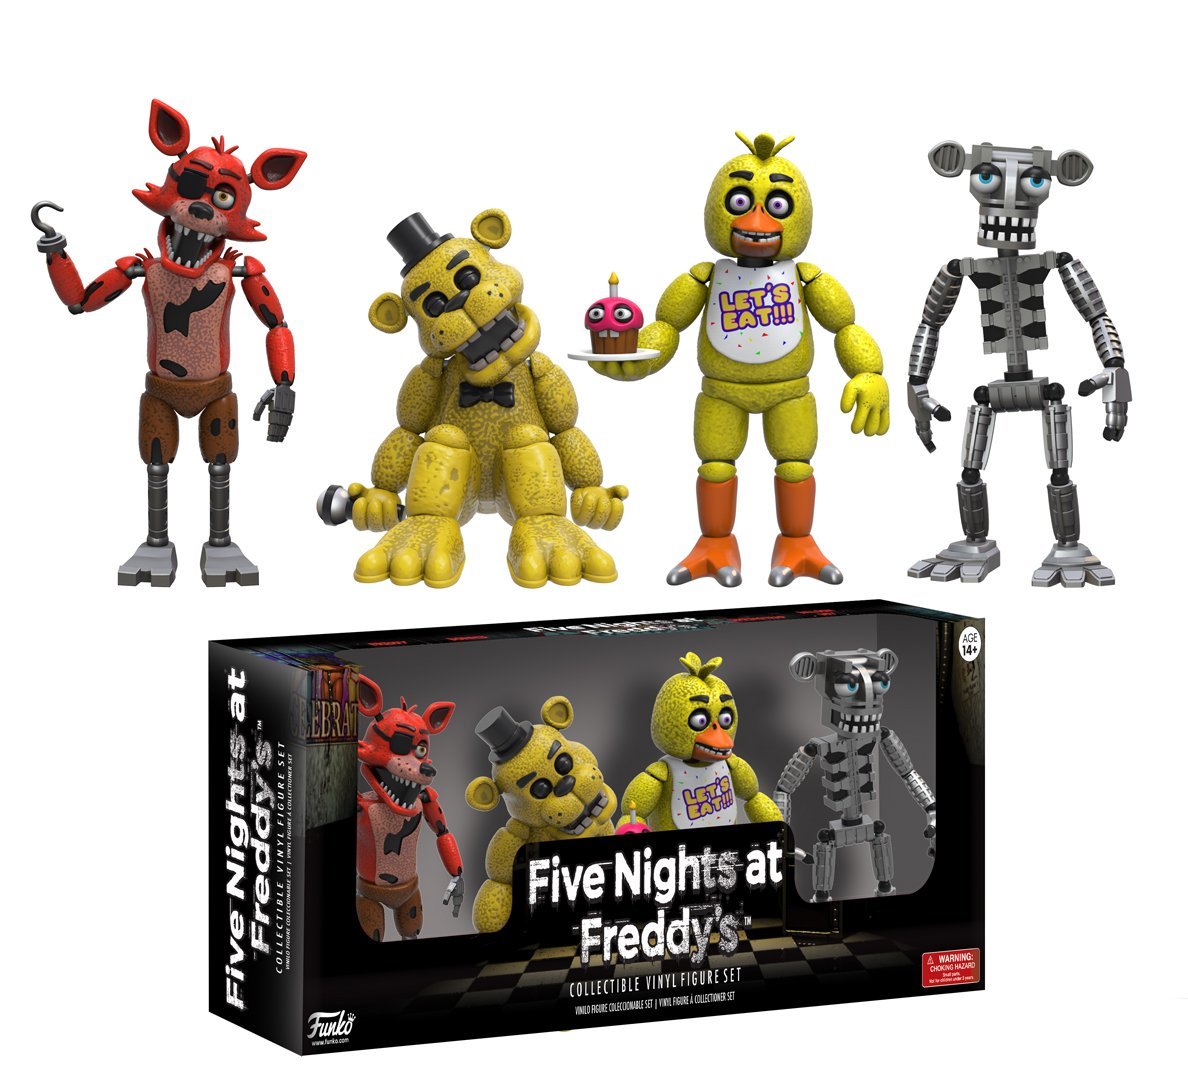 Five Nights at Freddy's フィギュア4体セット その１ - Game Station 